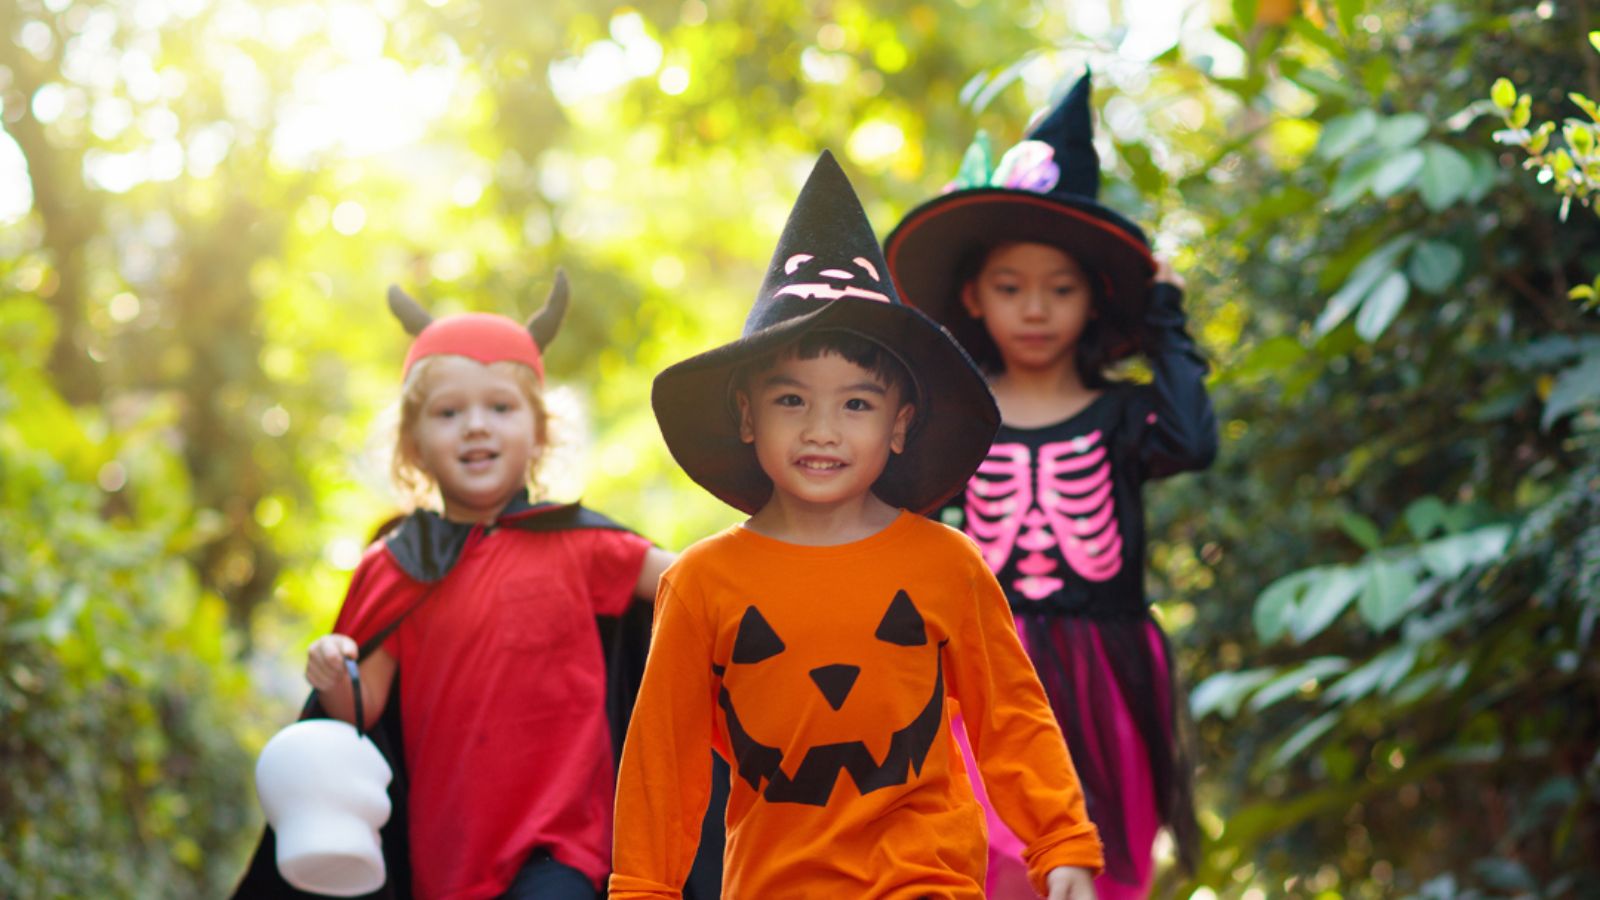 Three children walking towards the camera in halloween costumes, one is dressed as a devil - carrying a trick or treat basket, one has a pumpkin shirt on with a witches hat, and one is dressed as a witch. 